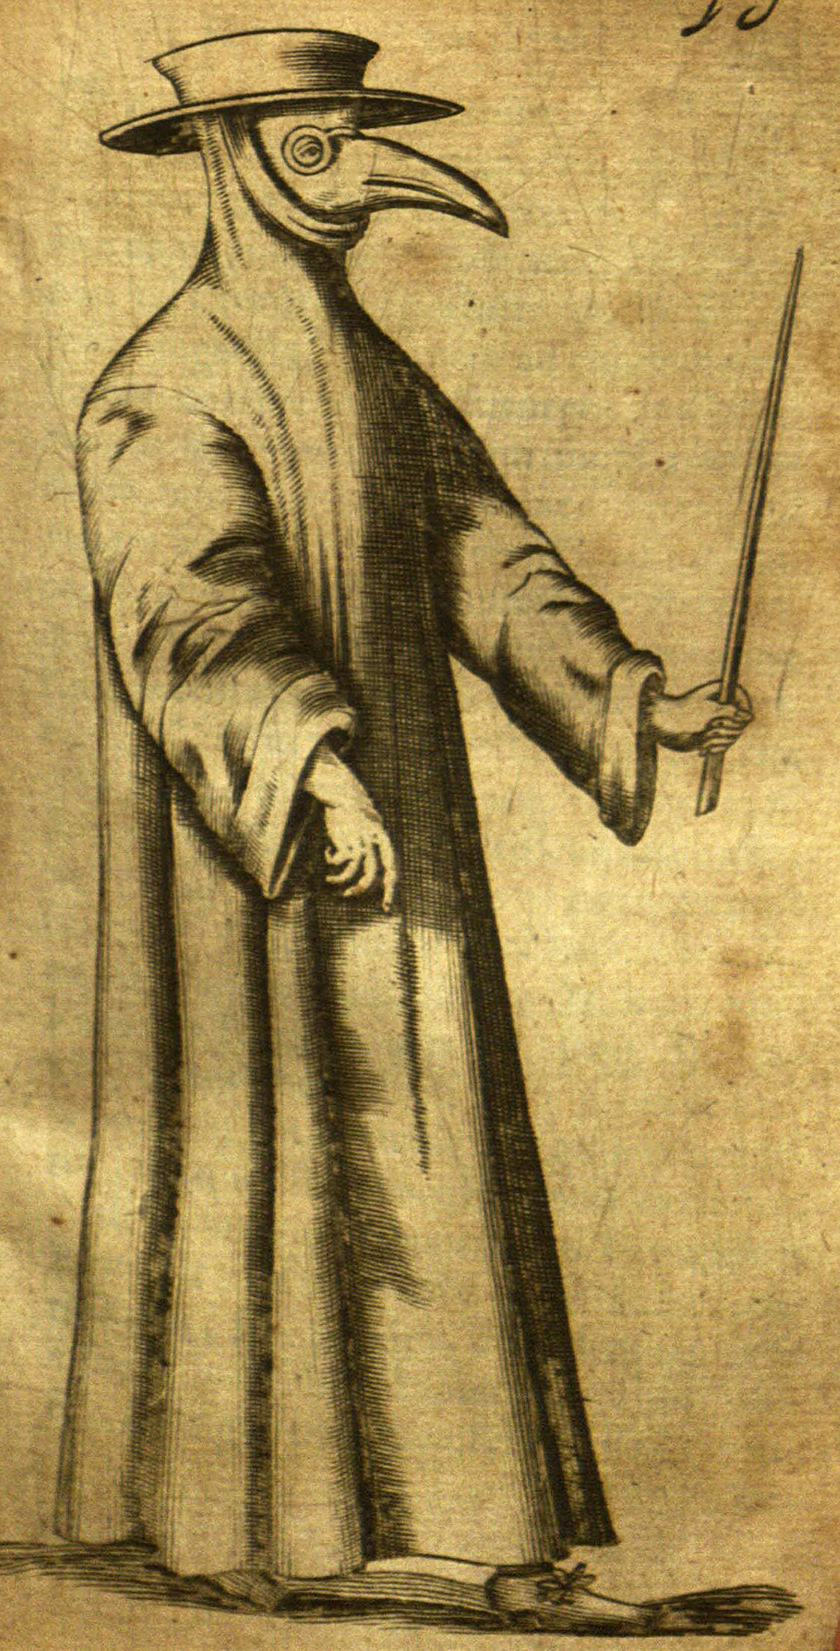 Black and white illustration of a beak doctor, a man wearing long robes and a mask with crystal eyes and a long beak-like nose filled with perfumes.